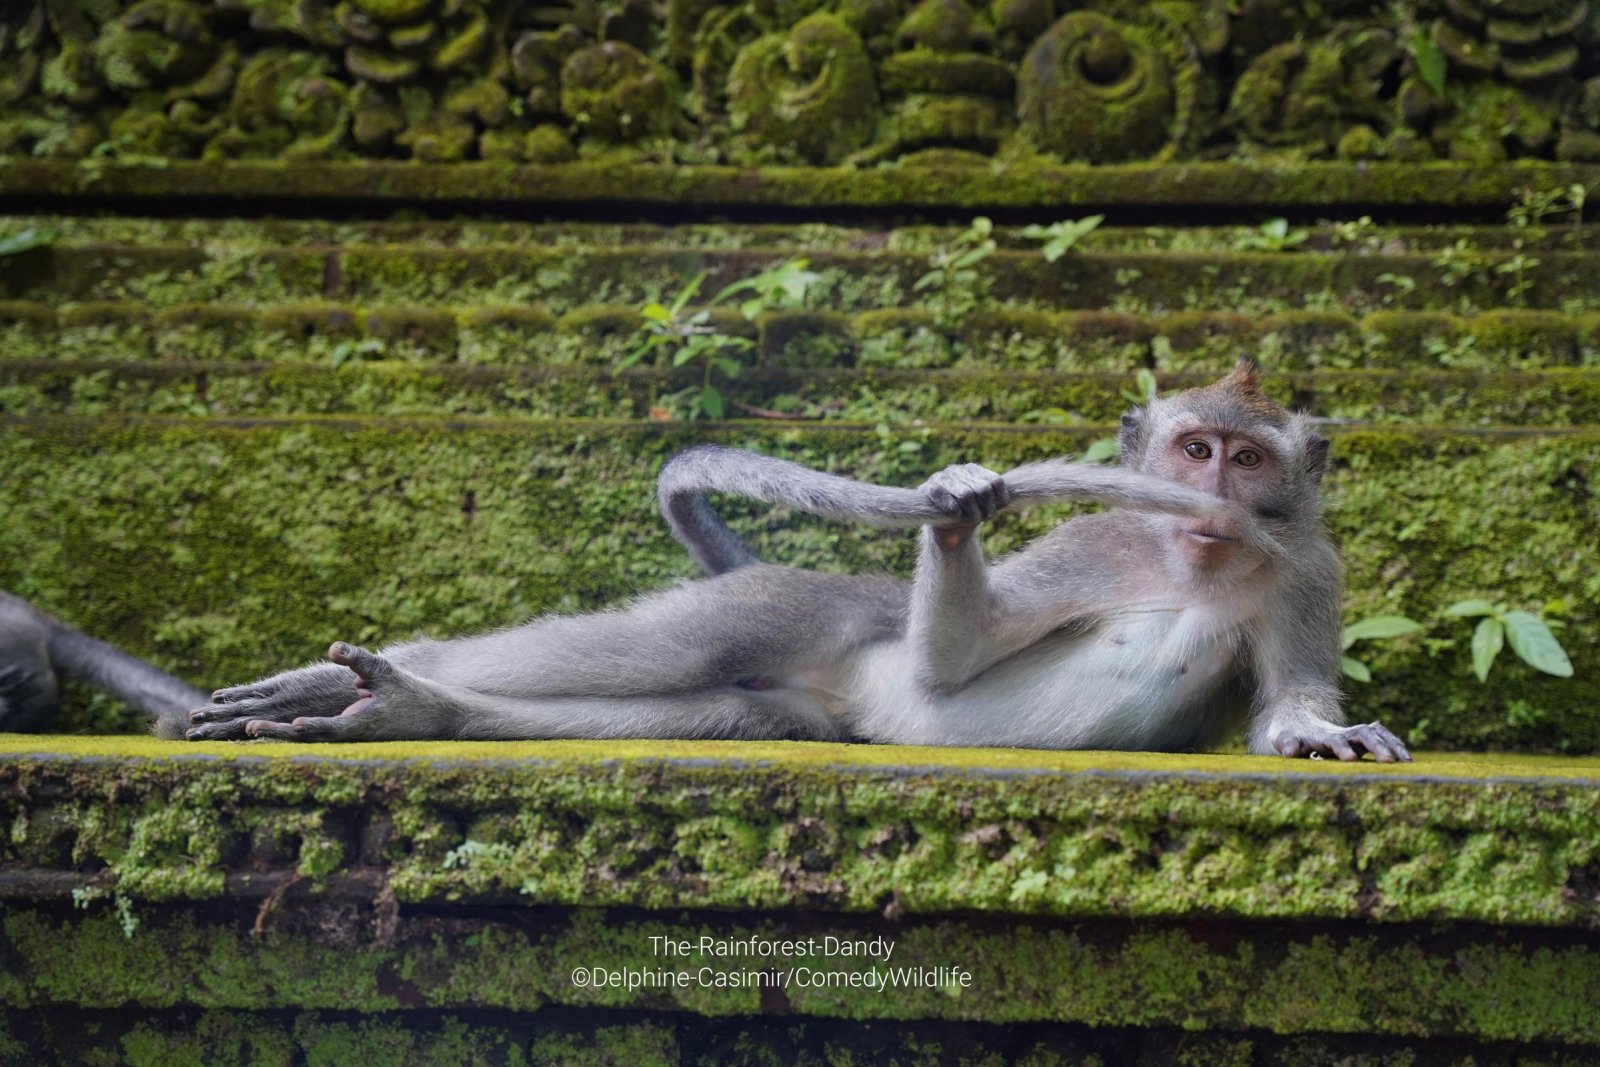 A monkey lying down holding its tail on a green, mossy step